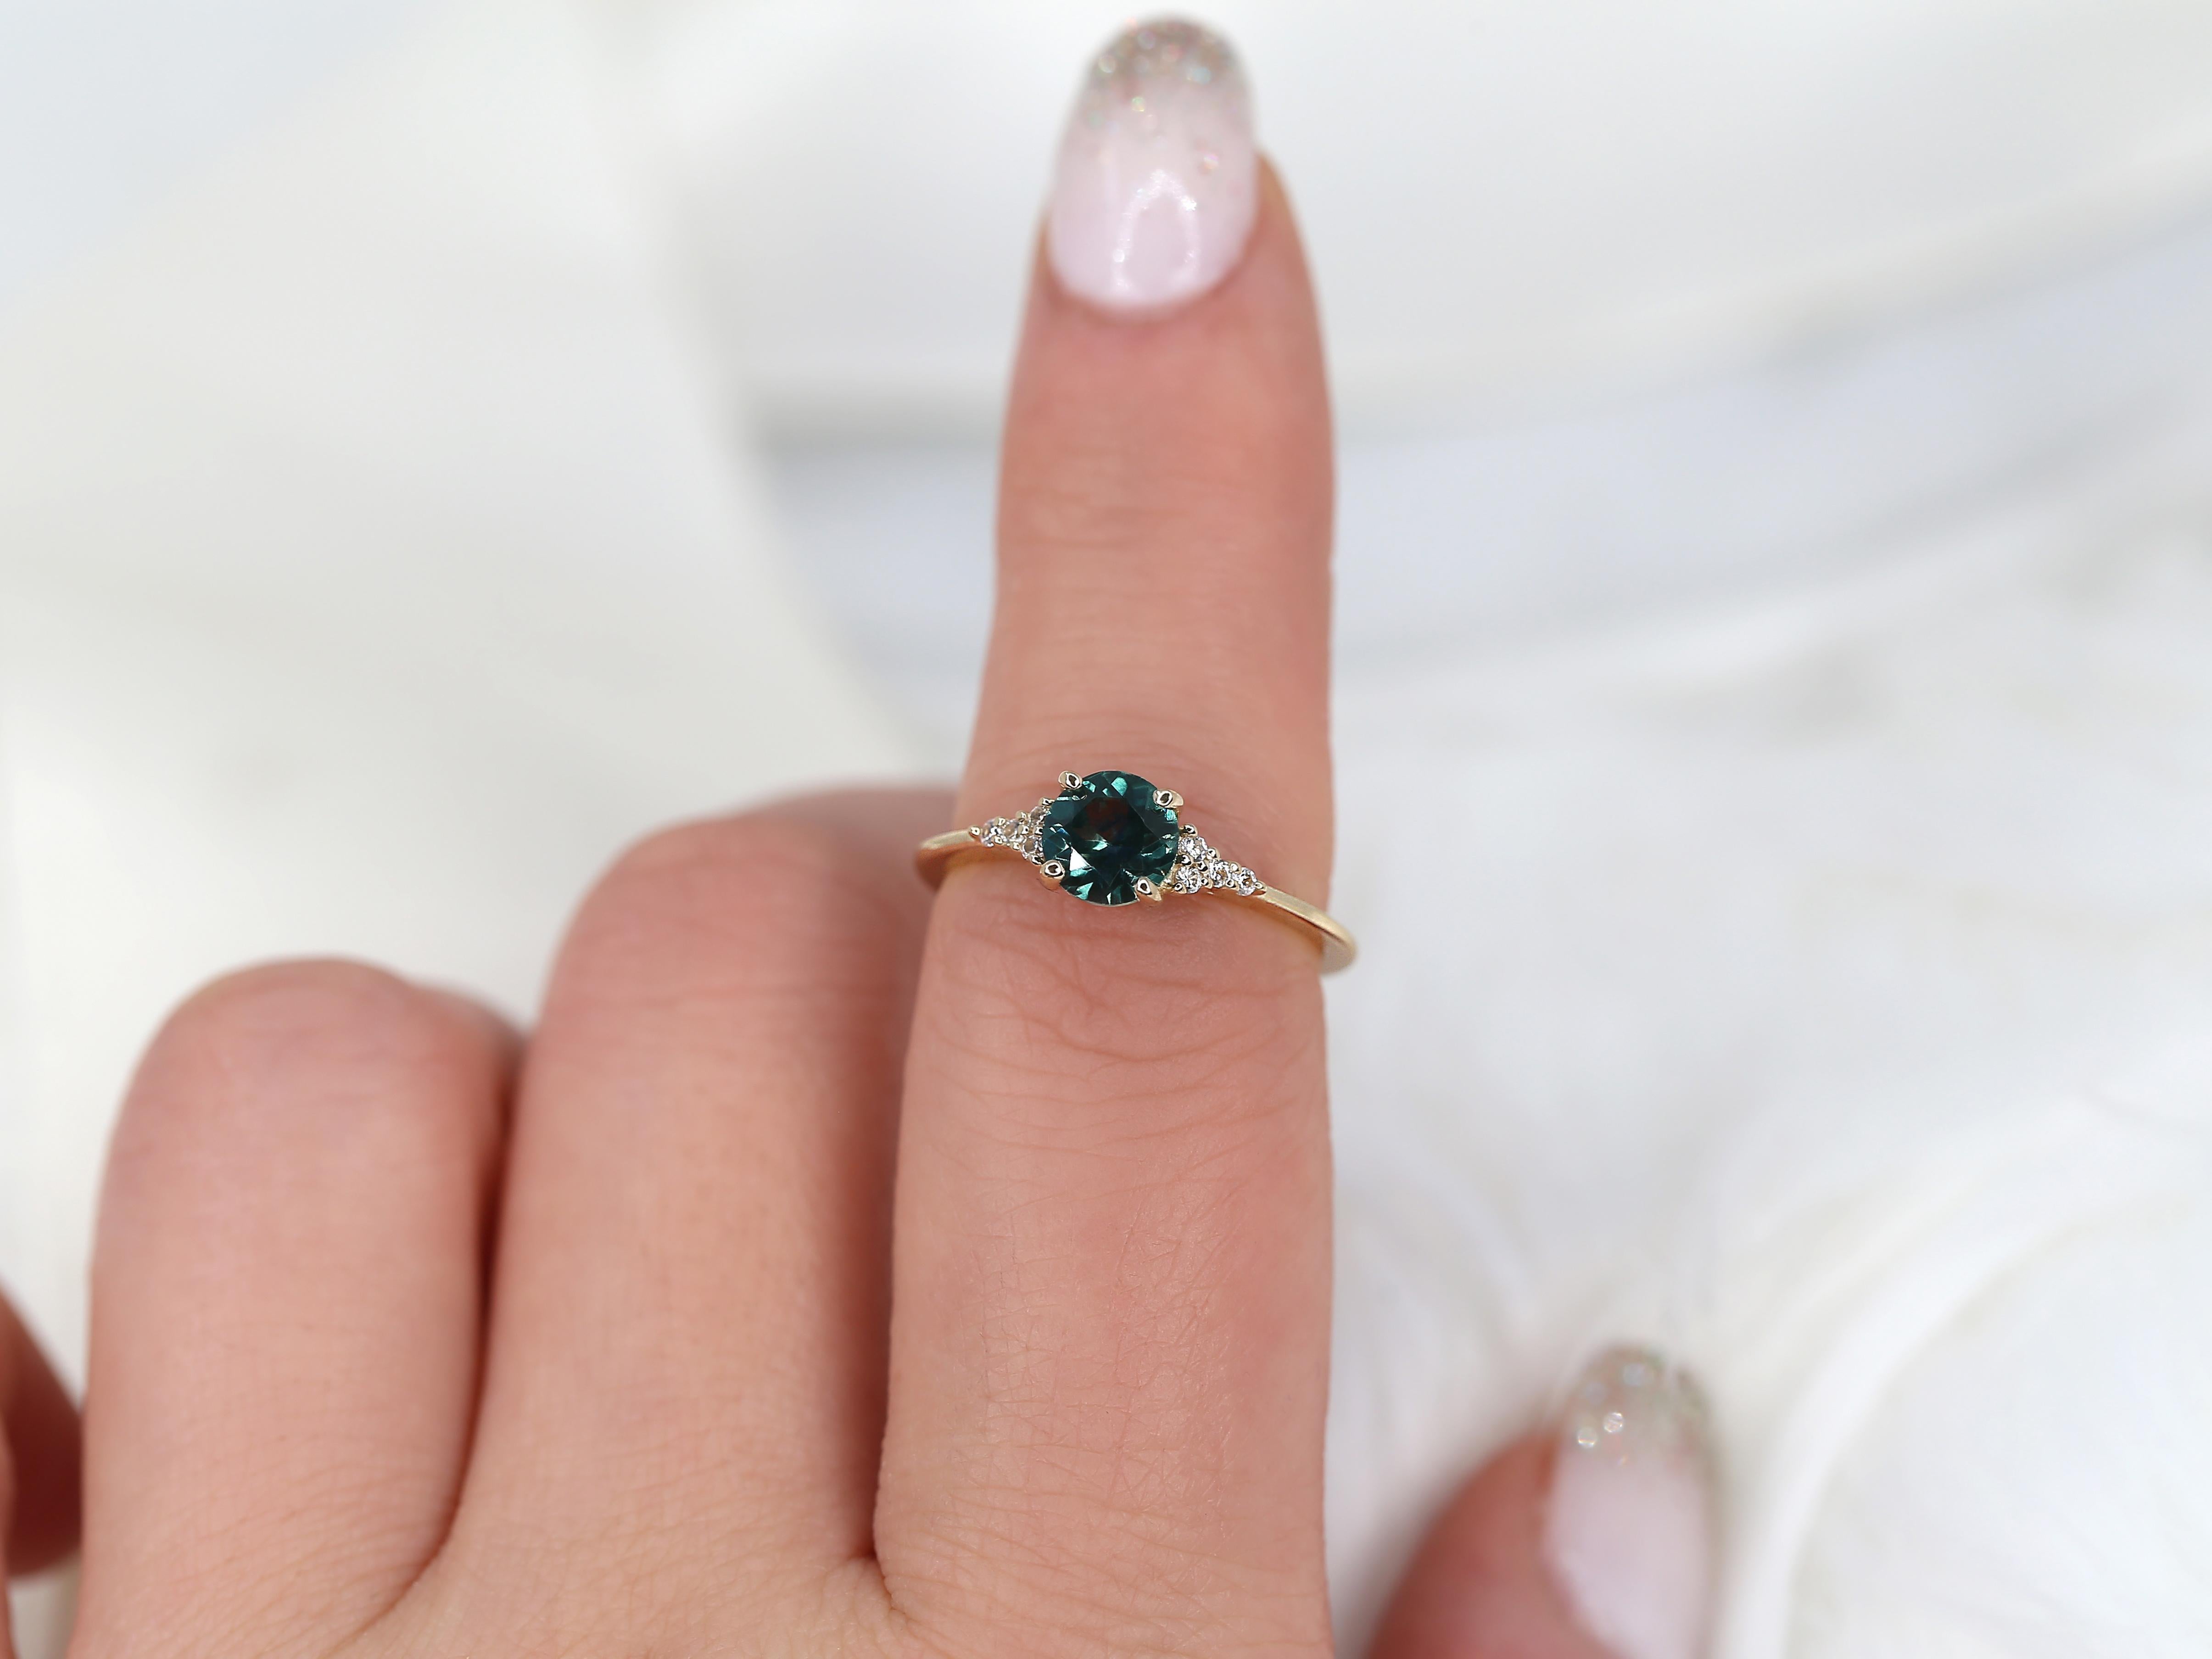 Our American made Malia is mounted with a stunning Montana teal sapphire that is radiant and dazzling in daylight. This cluster ring can easily be worn as a stand alone piece or layered with stacking ring for a dressier look!

Details of